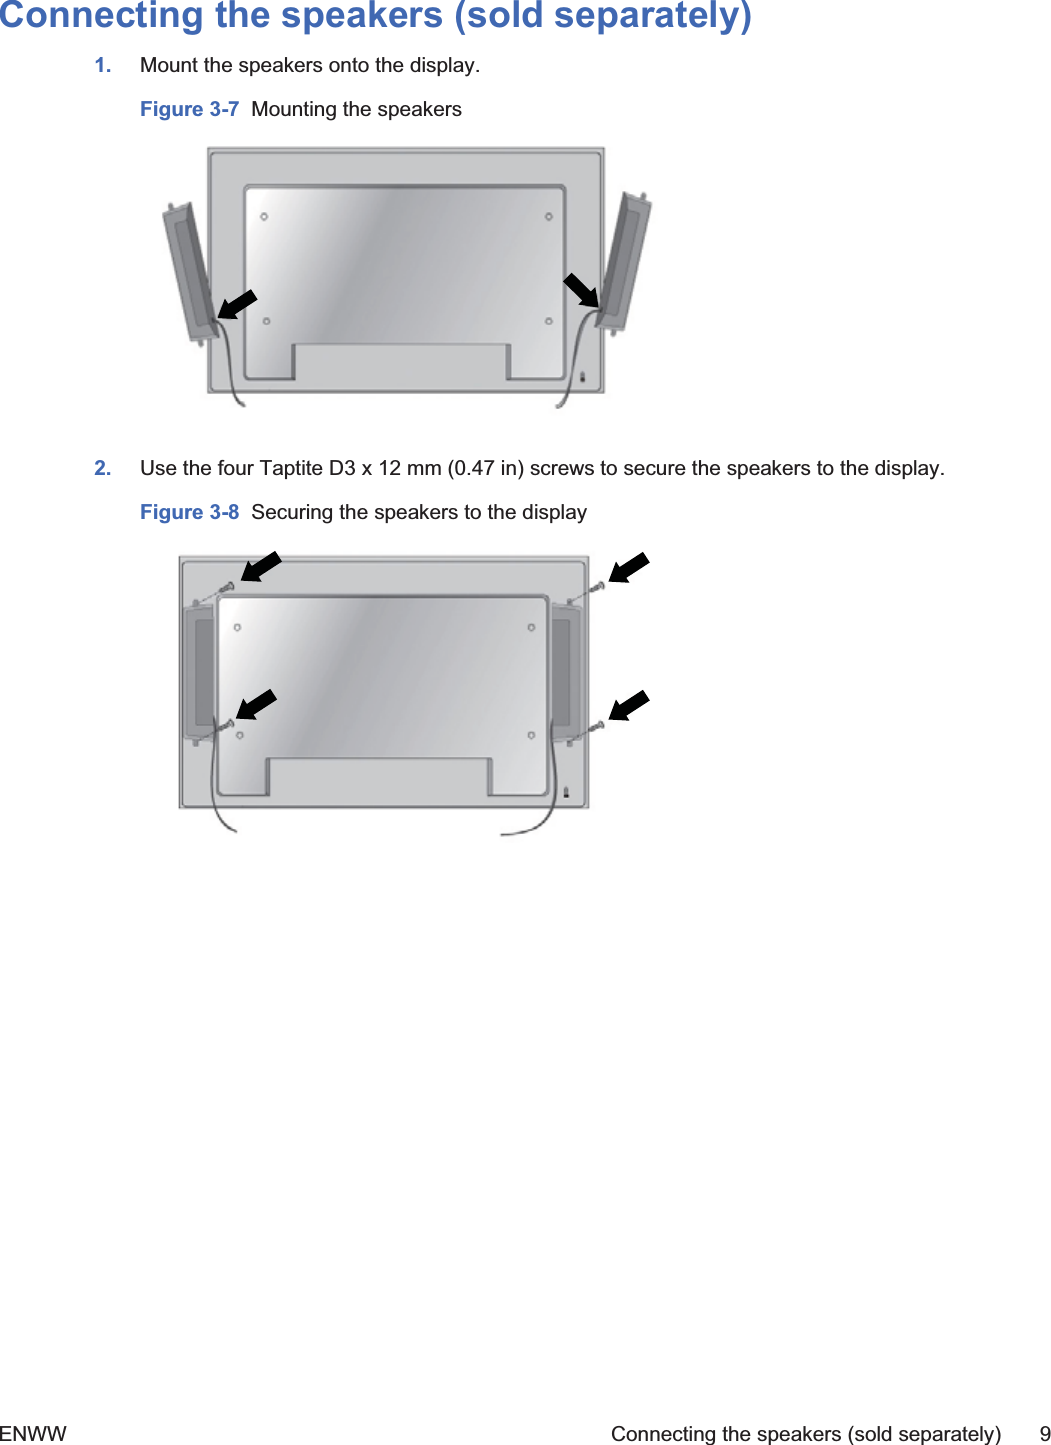 Connecting the speakers (sold separately)1. Mount the speakers onto the display.Figure 3-7  Mounting the speakers2. Use the four Taptite D3 x 12 mm (0.47 in) screws to secure the speakers to the display.Figure 3-8  Securing the speakers to the displayENWW Connecting the speakers (sold separately) 9